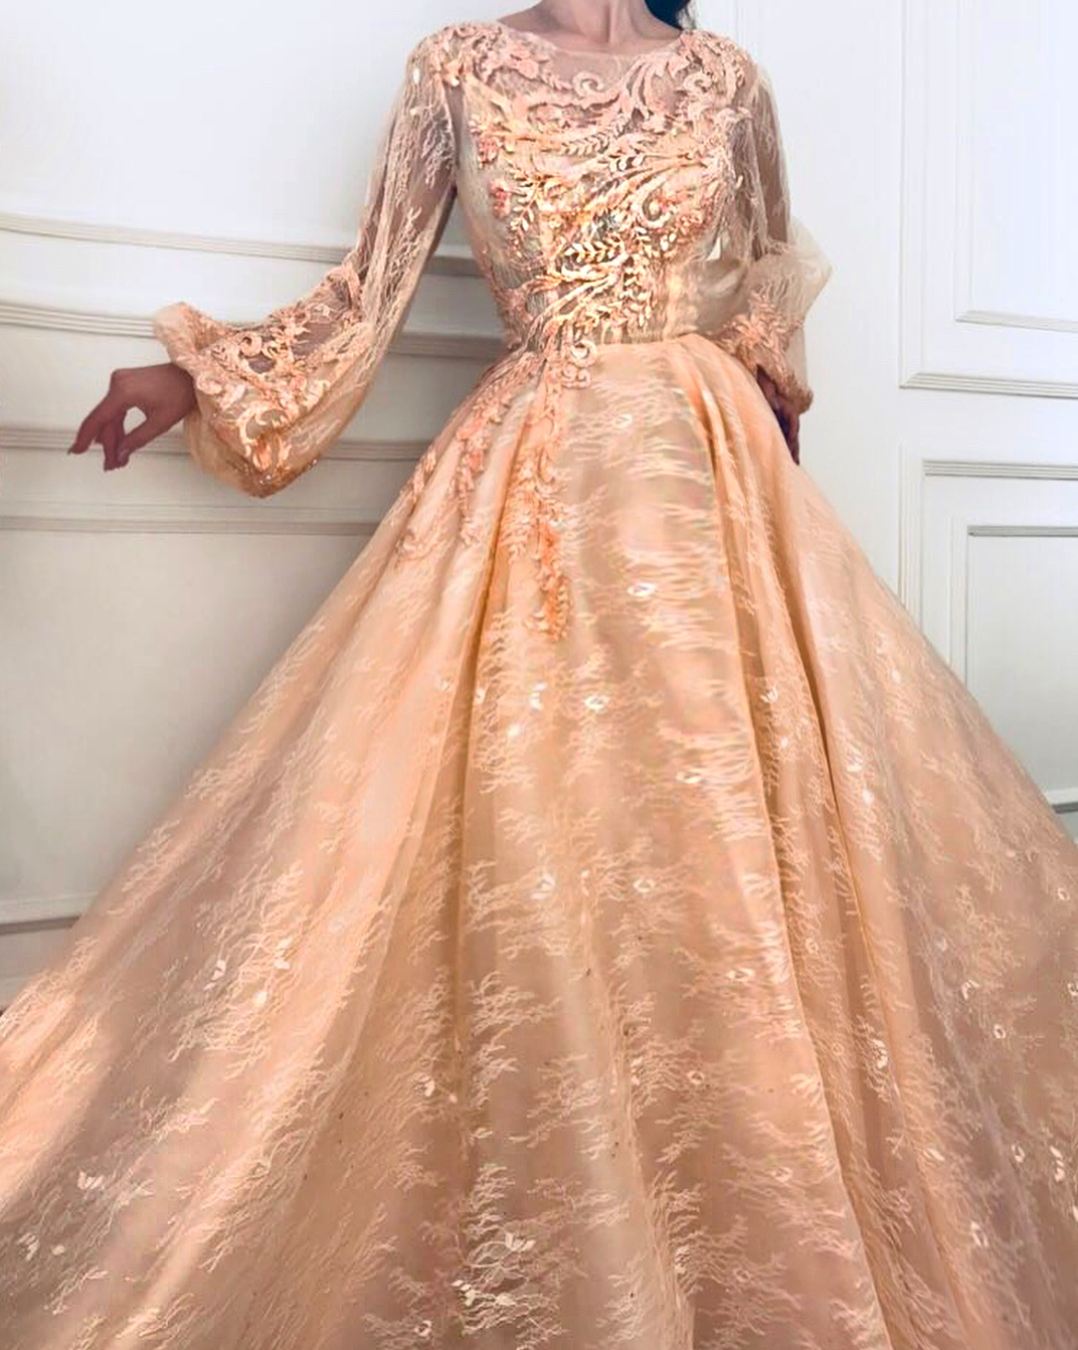 Peach A-Line dress with lace, embroidery and long sleeves